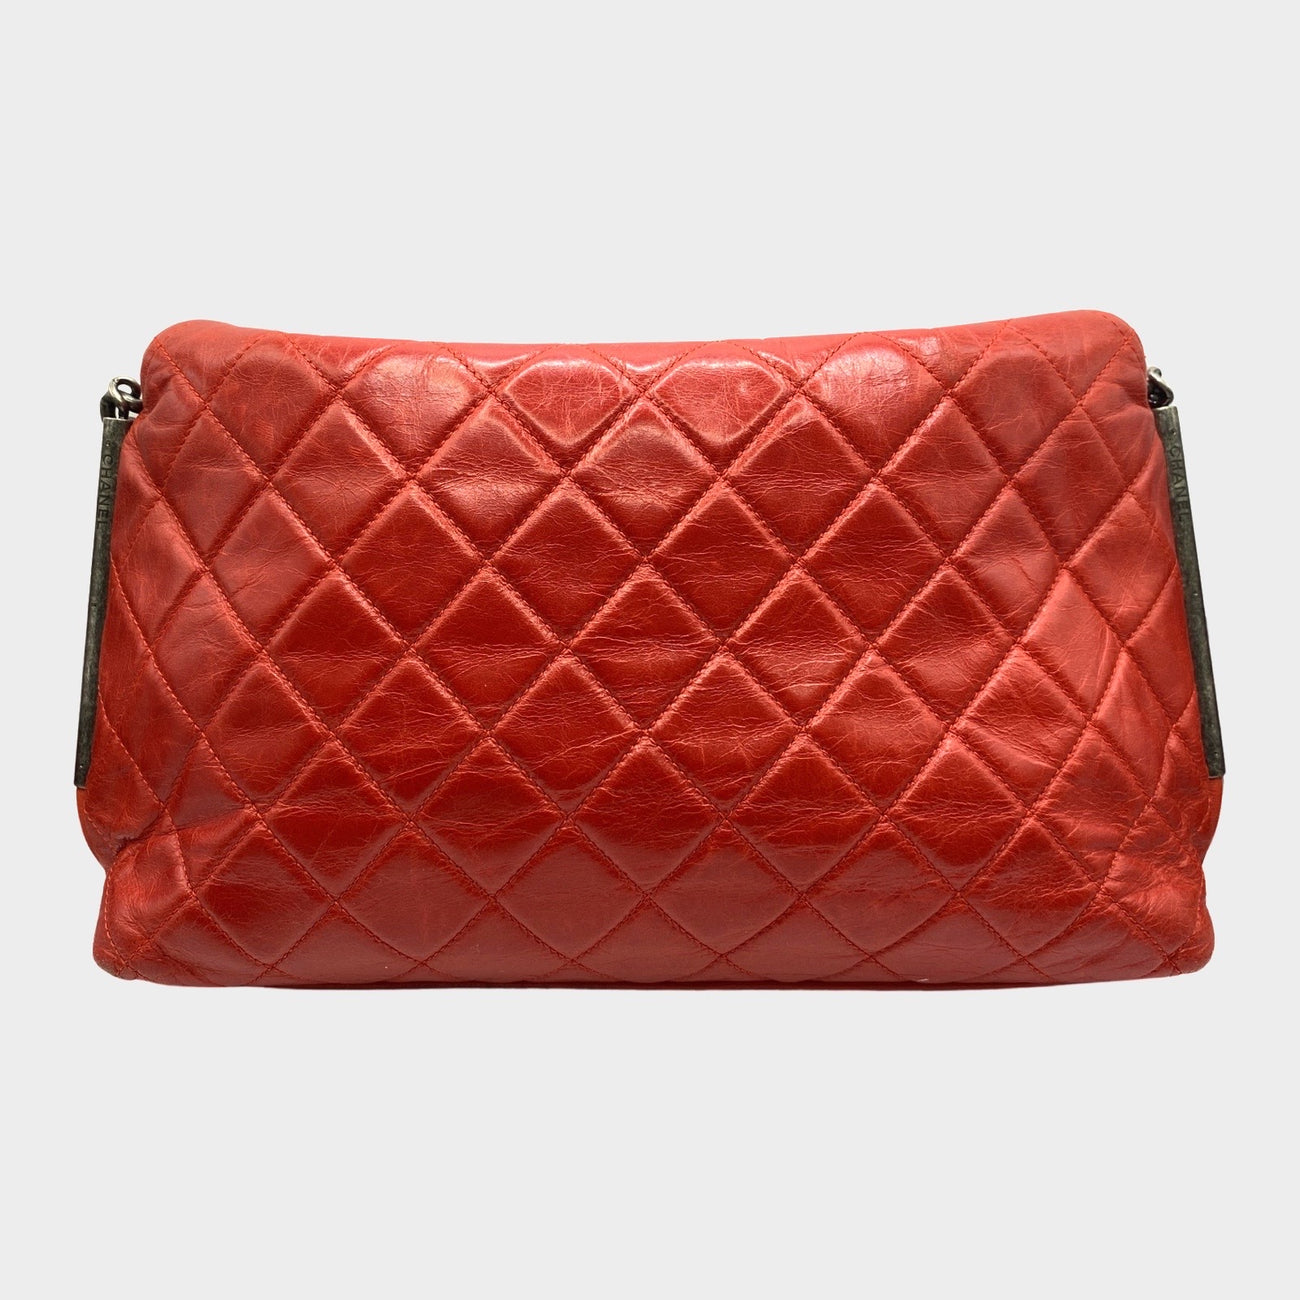 Chanel women's cherry red quilted leather handbag – Loop Generation